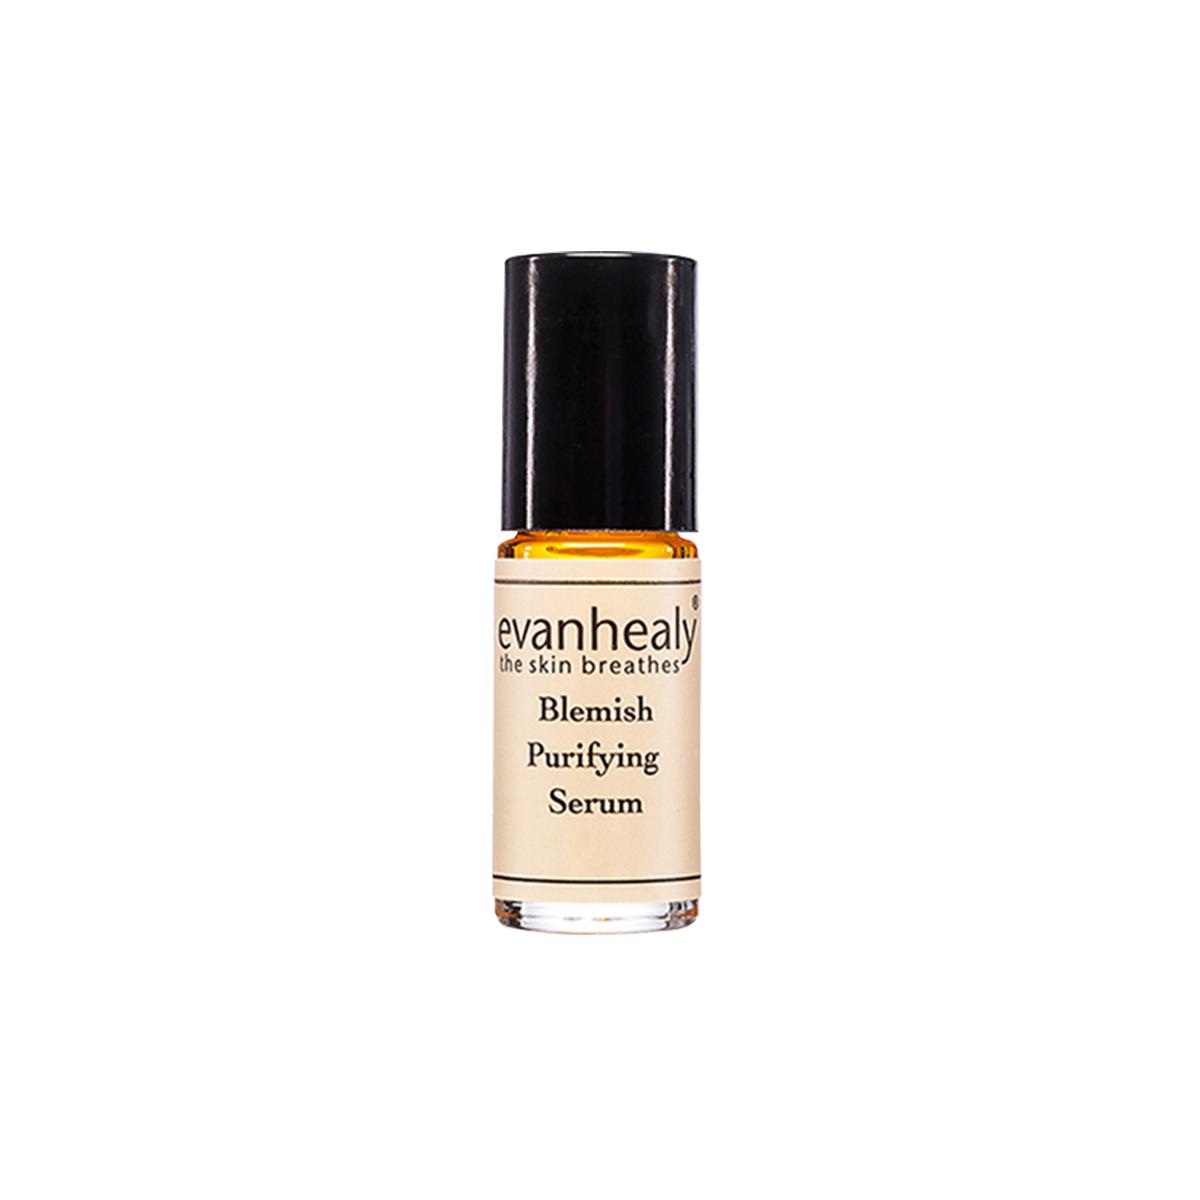 Primary image of Blemish Purifying Serum Roll-On